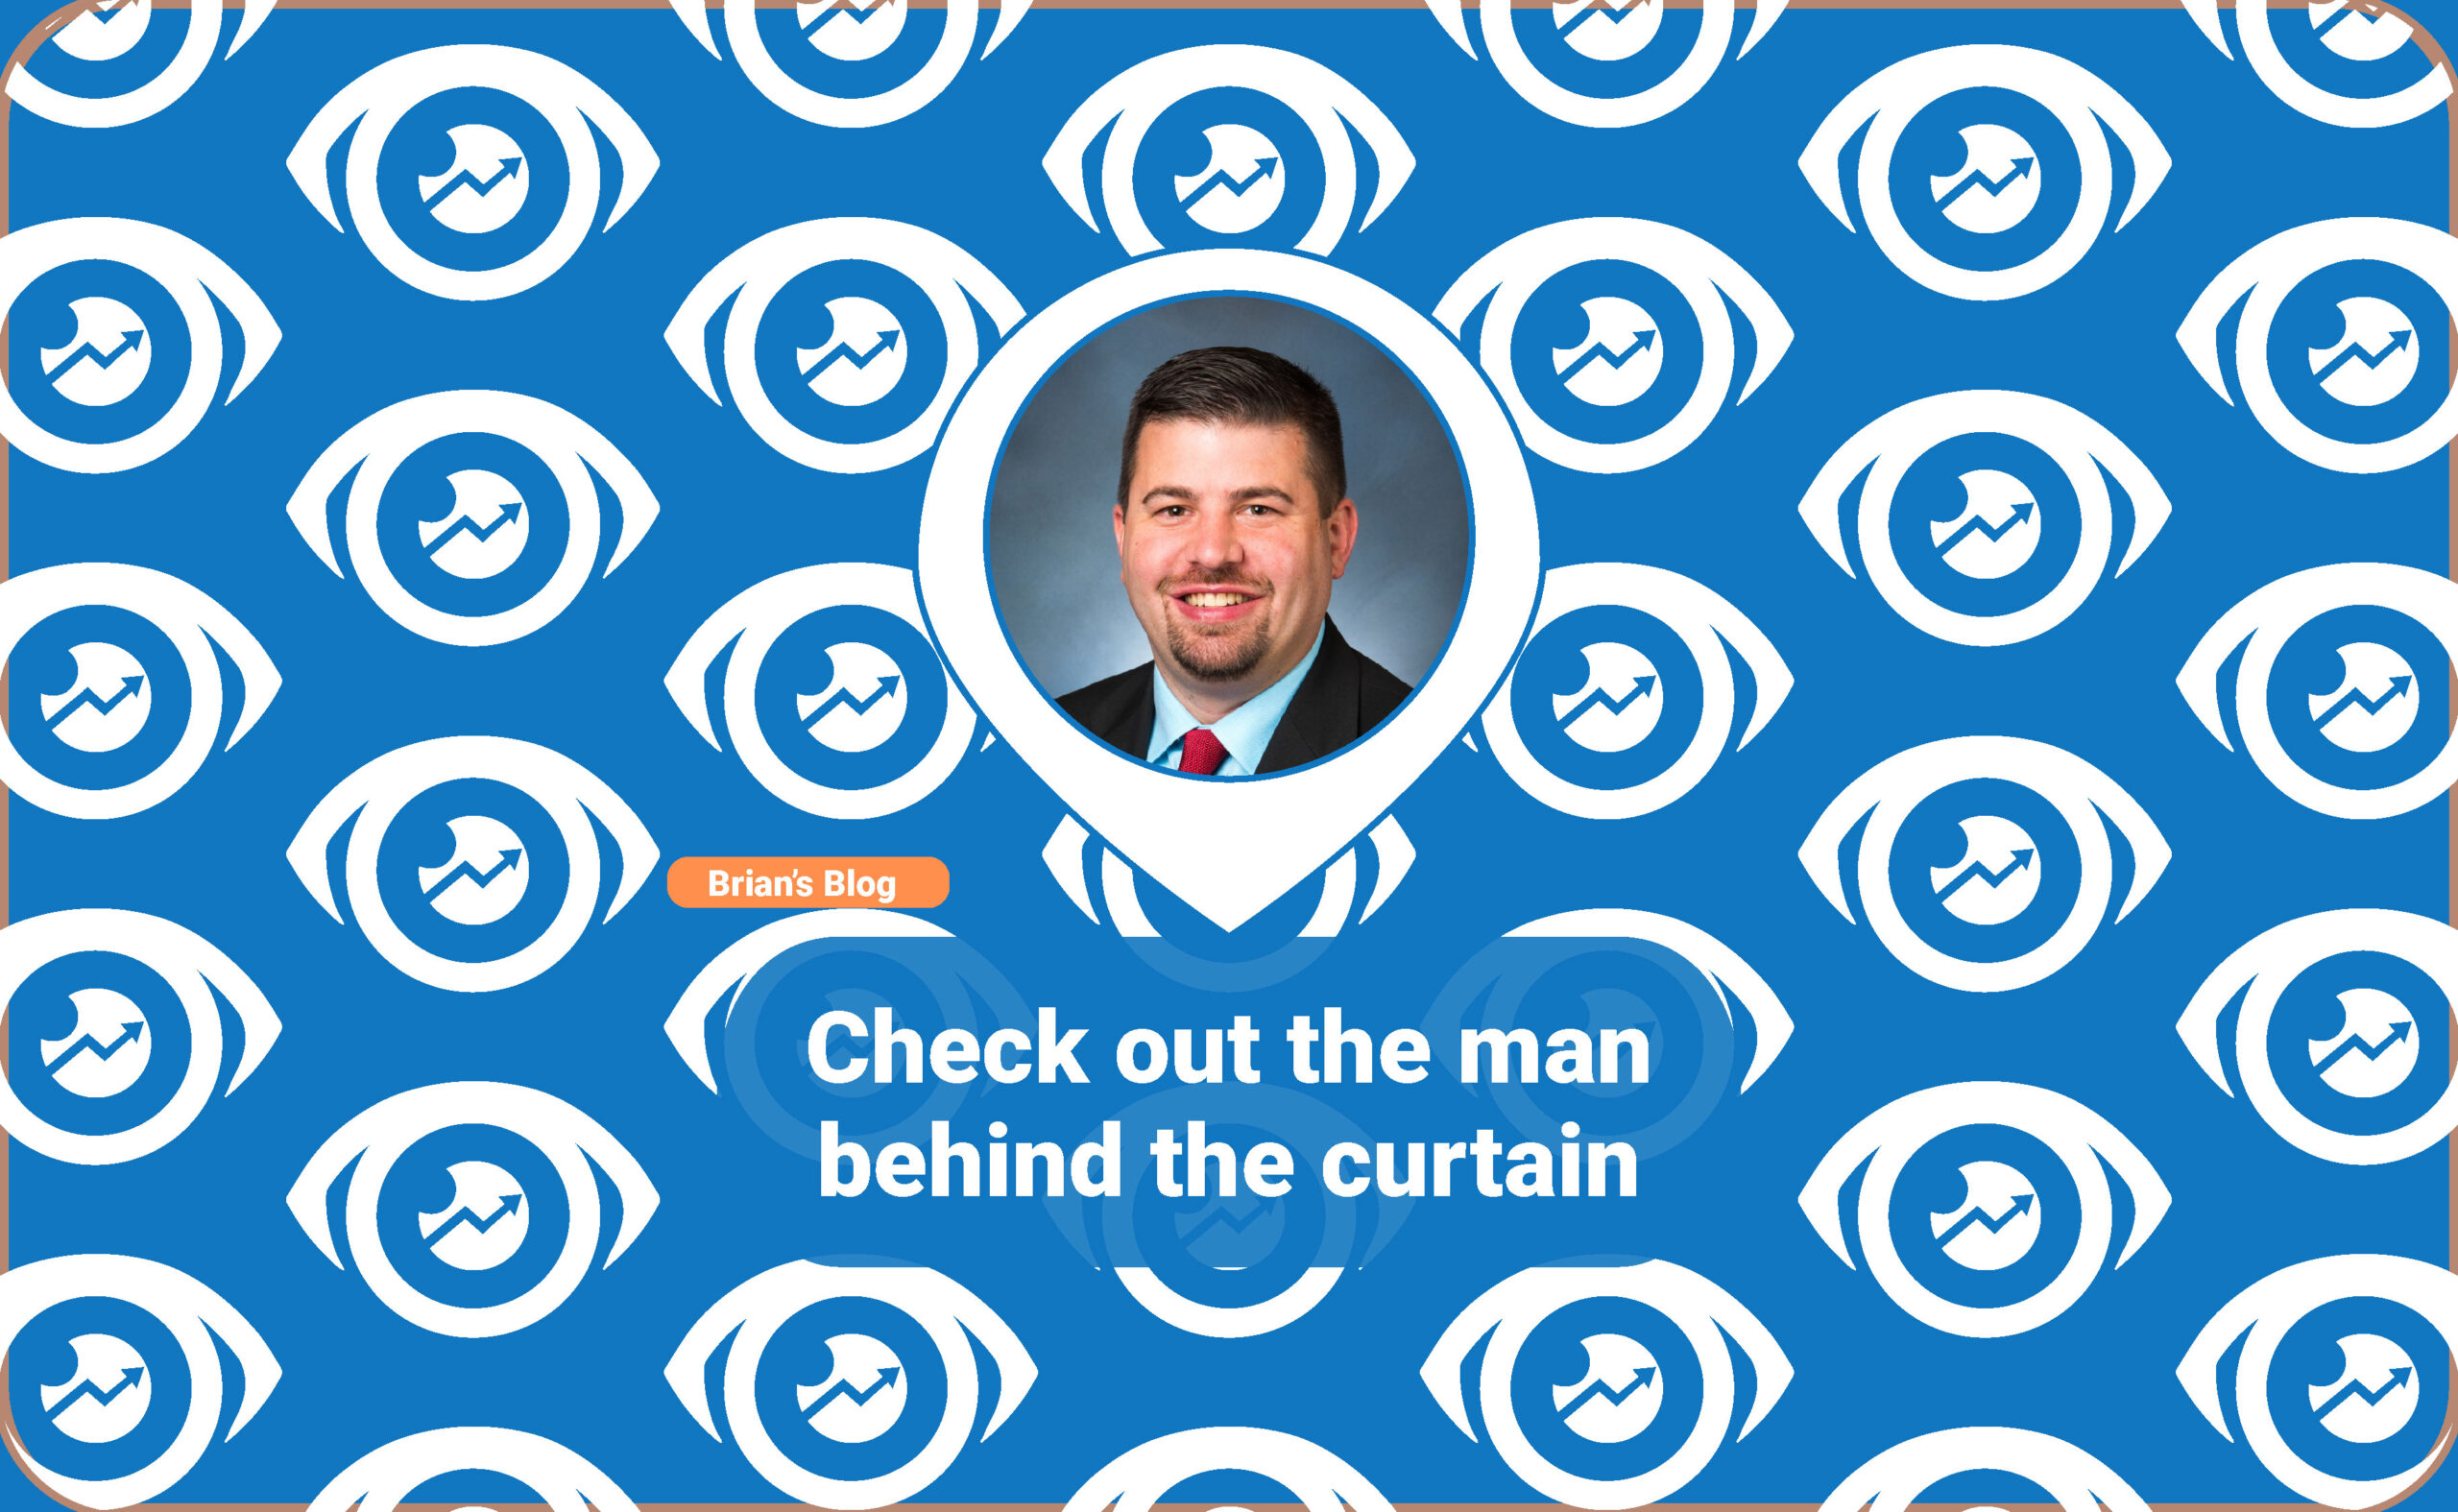 Check out the man behind the curtain.